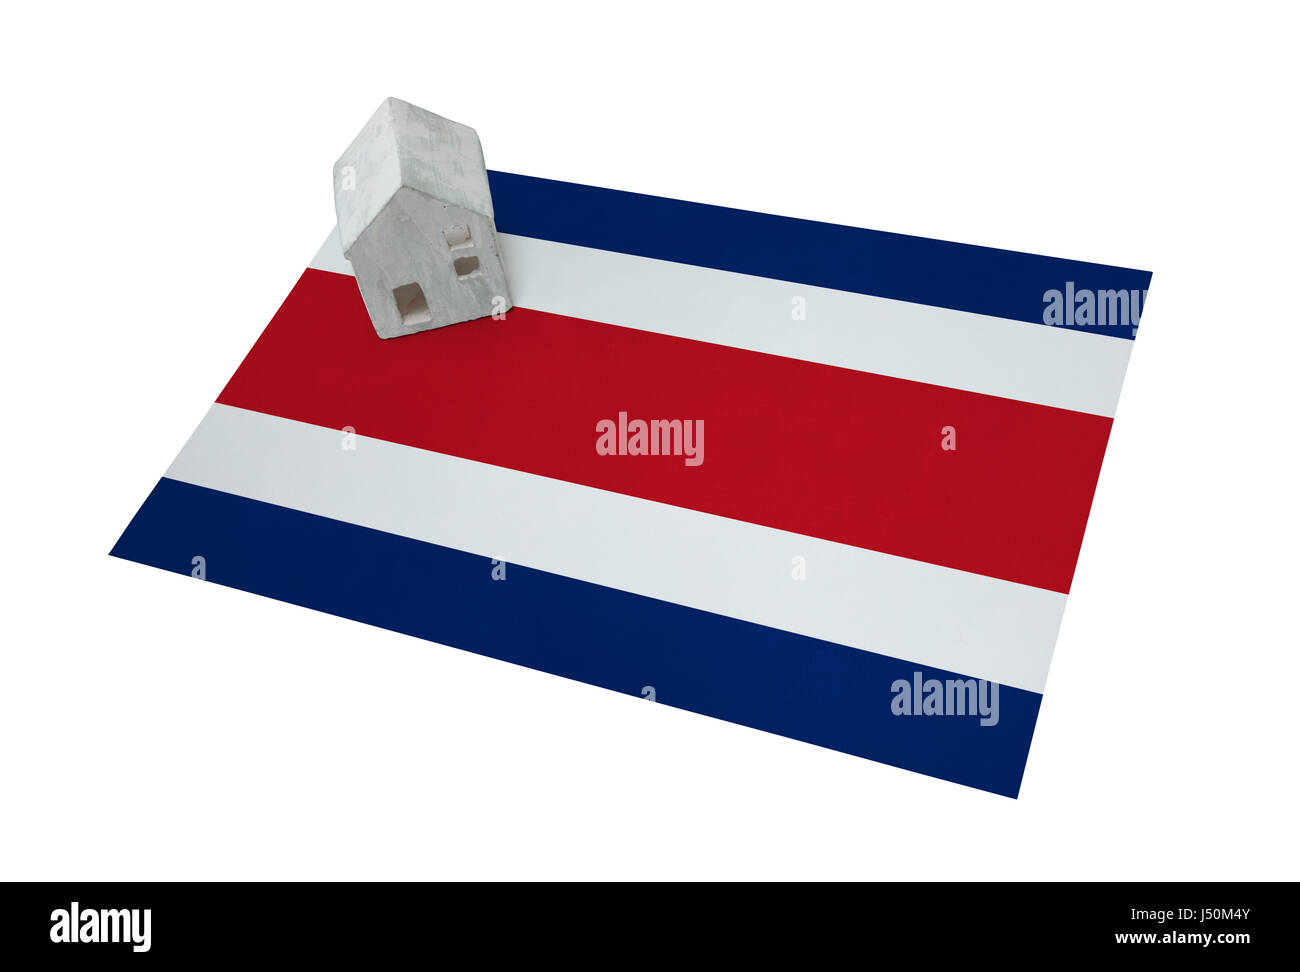 Small house on a flag - Living or migrating to Costa Rica Stock Photo